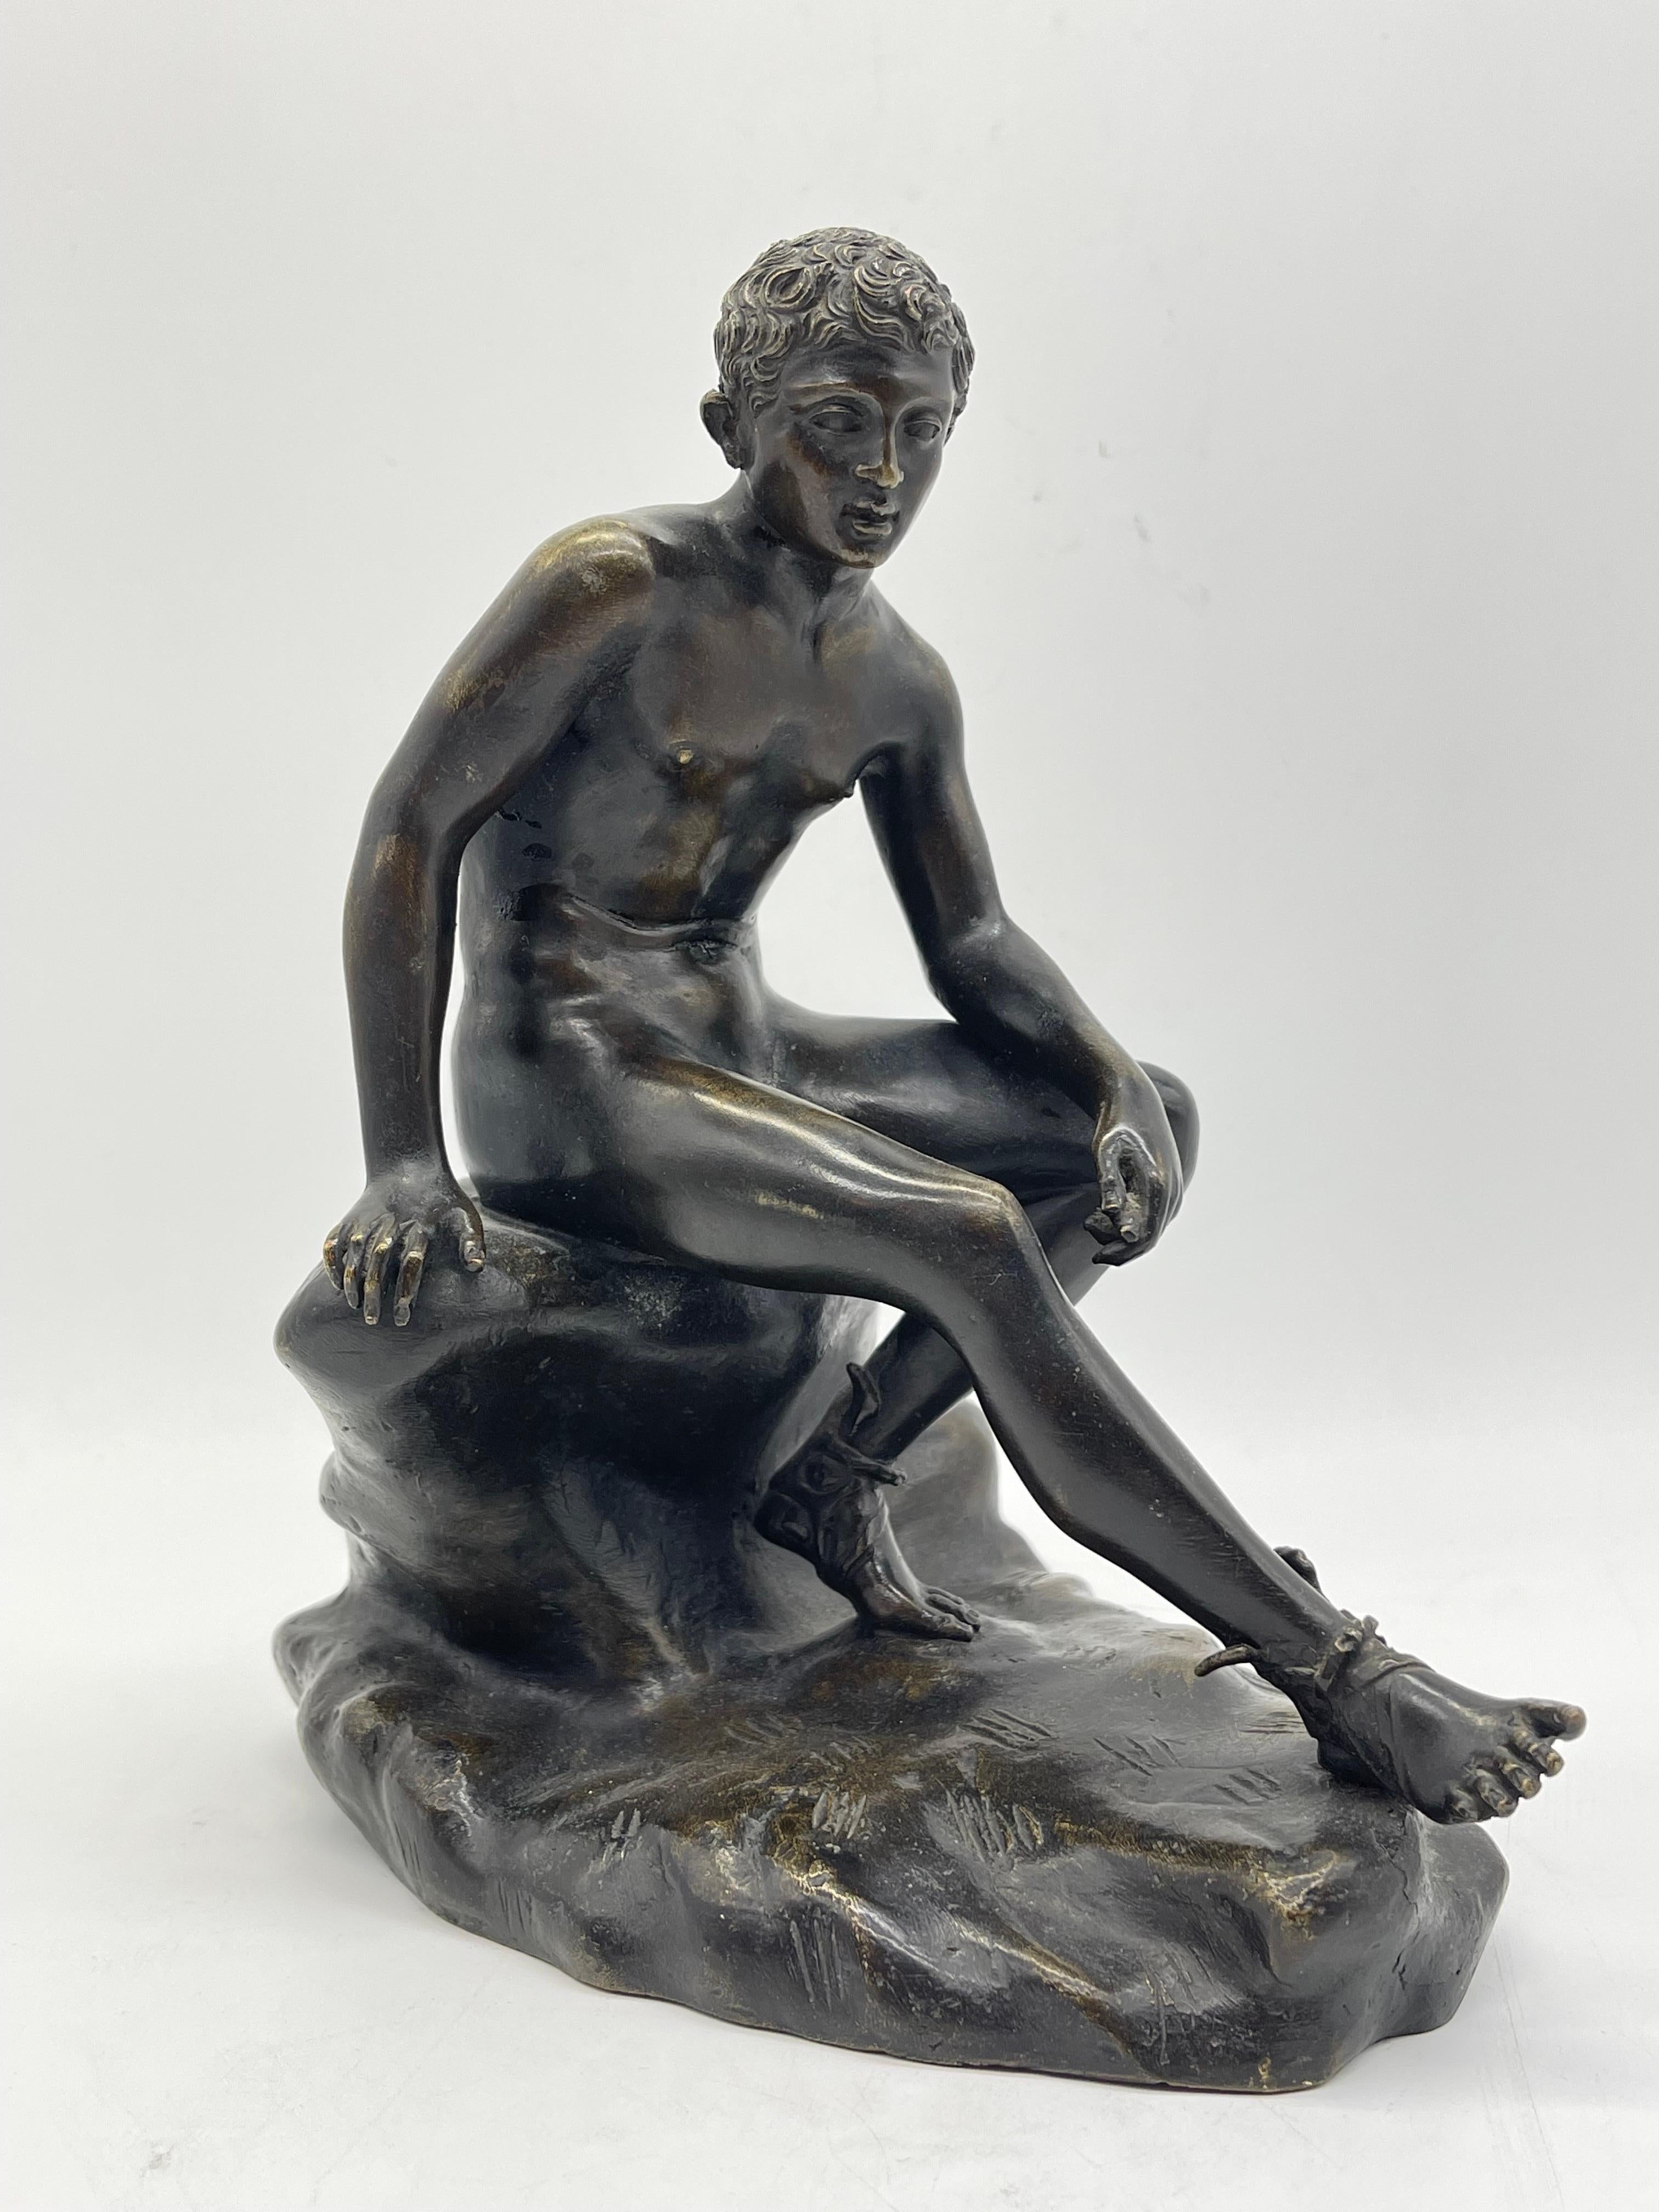 Seated athletic bronze sculpture / Figure Greek - Roman mythology

Greek - Roman mythology

The condition can be seen in the pictures.